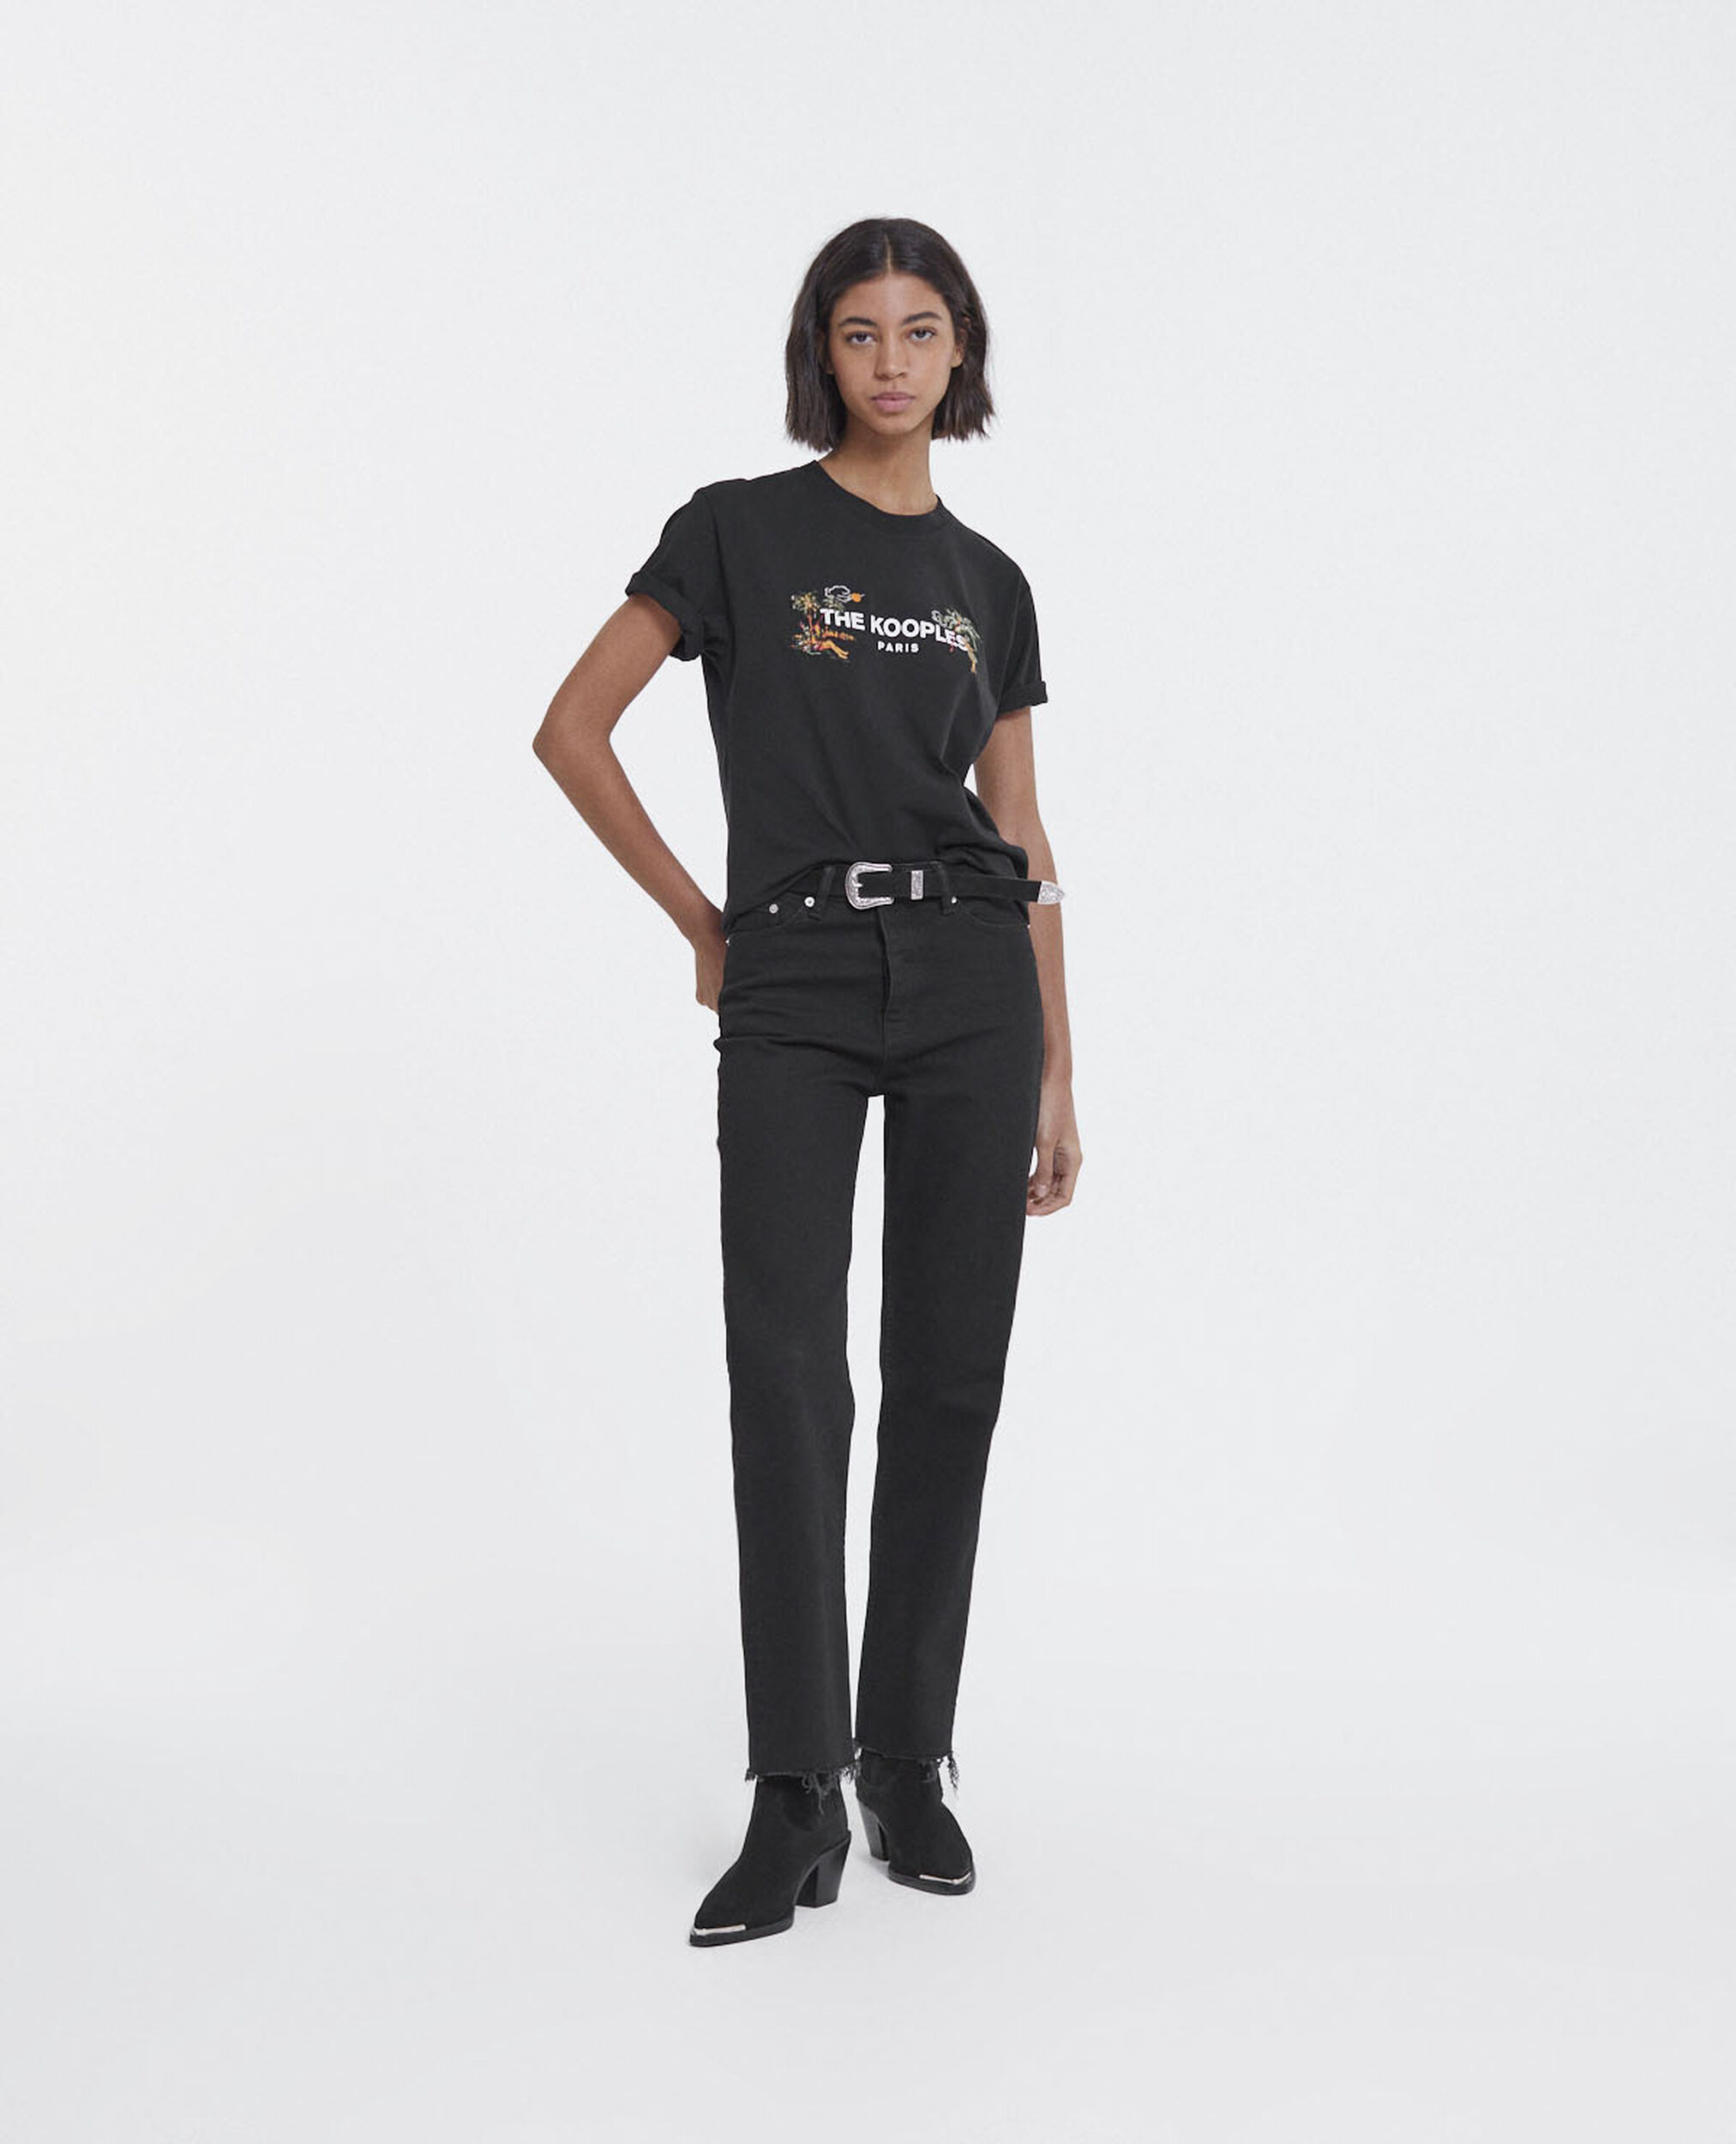 Embroidered black T-shirt with The Kooples logo, BLACK, hi-res image number null